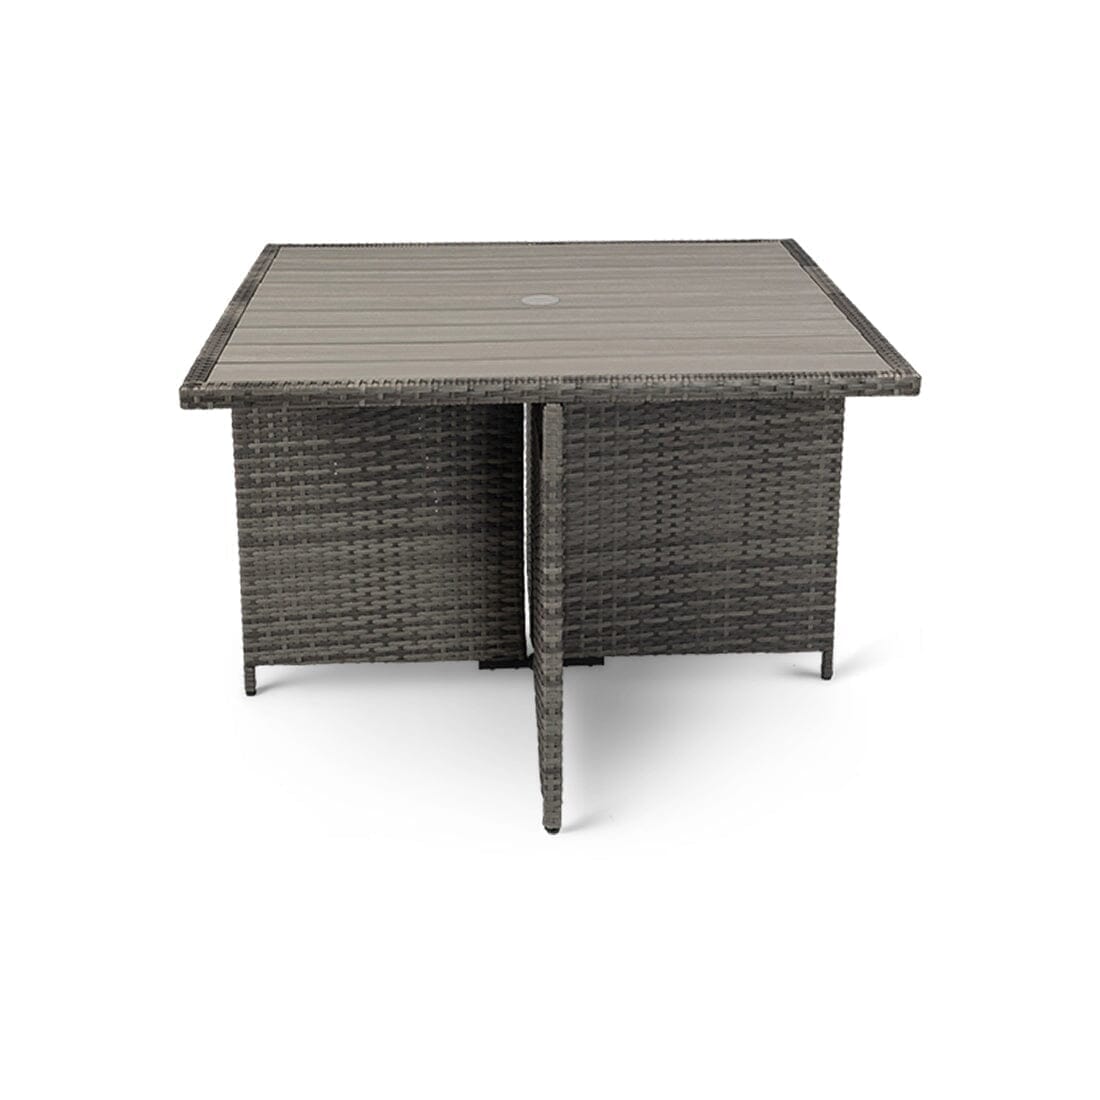 8 Seater Rattan Cube Outdoor Dining Set with Grey Parasol - Grey Weave Polywood Top